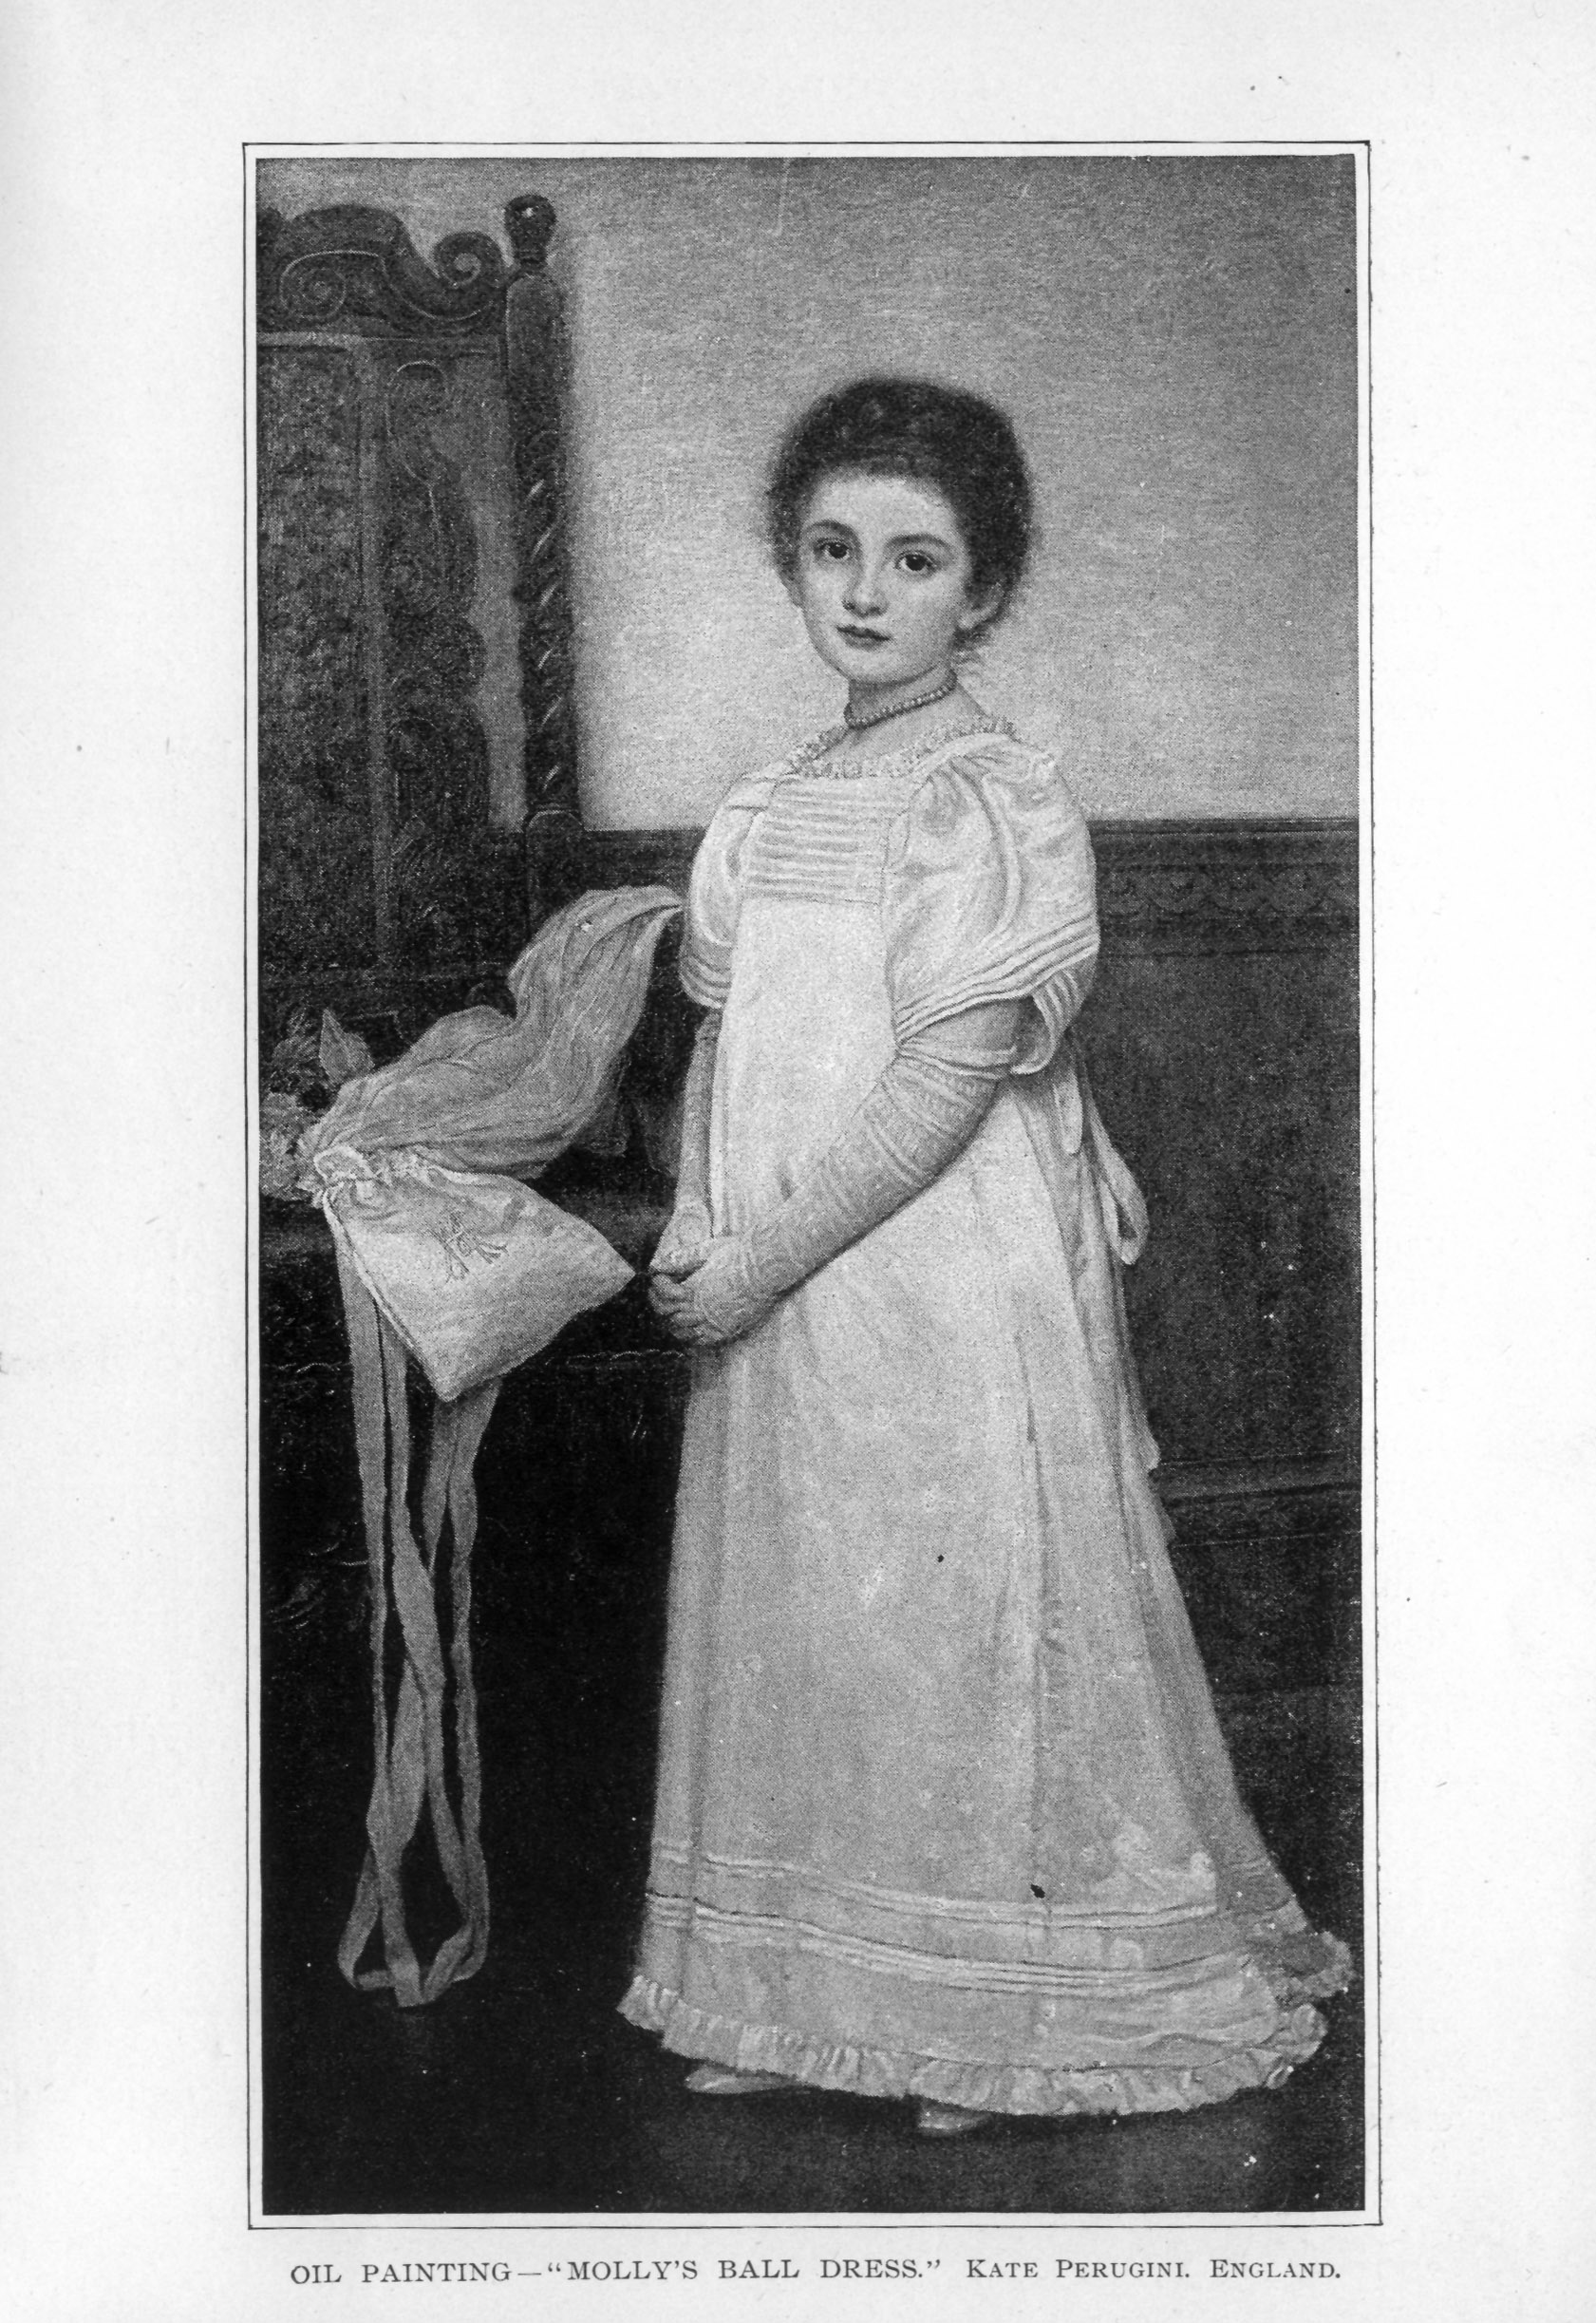 portrait of a young girl in a satin dress